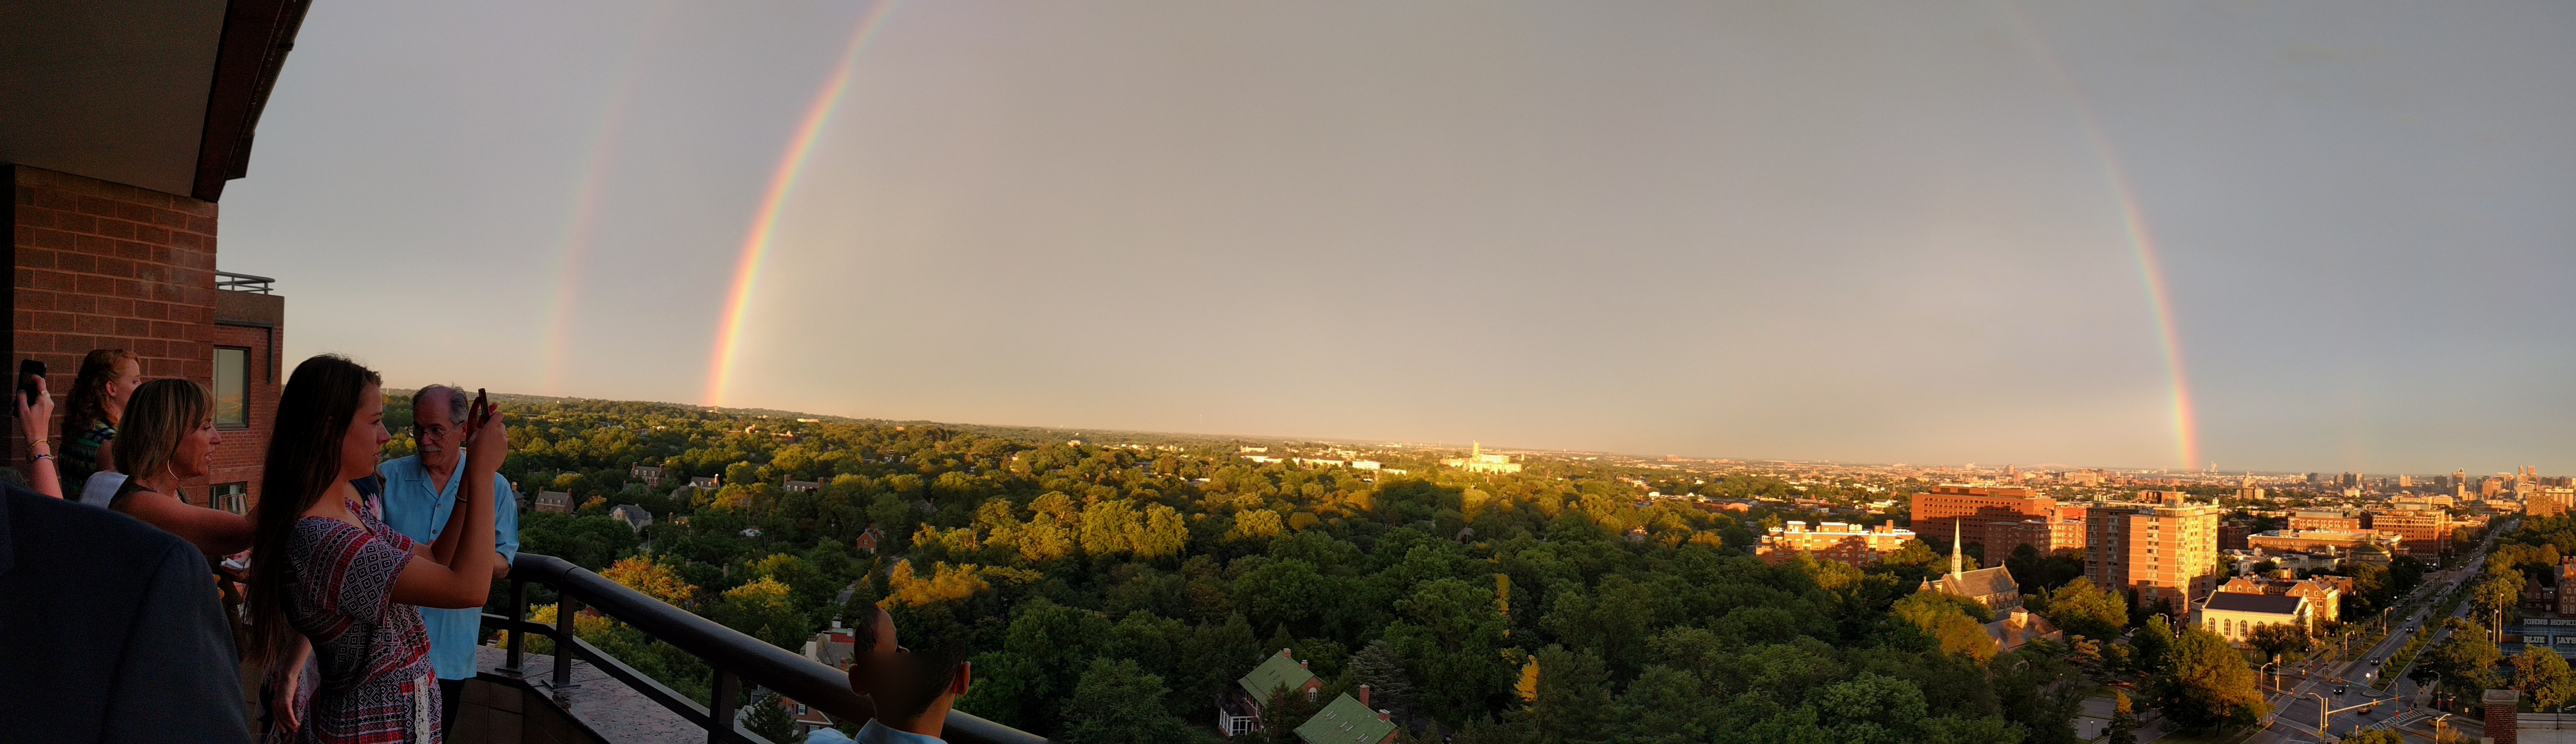 A Panorama of the Double Rainbow from Dan's Engagement Party